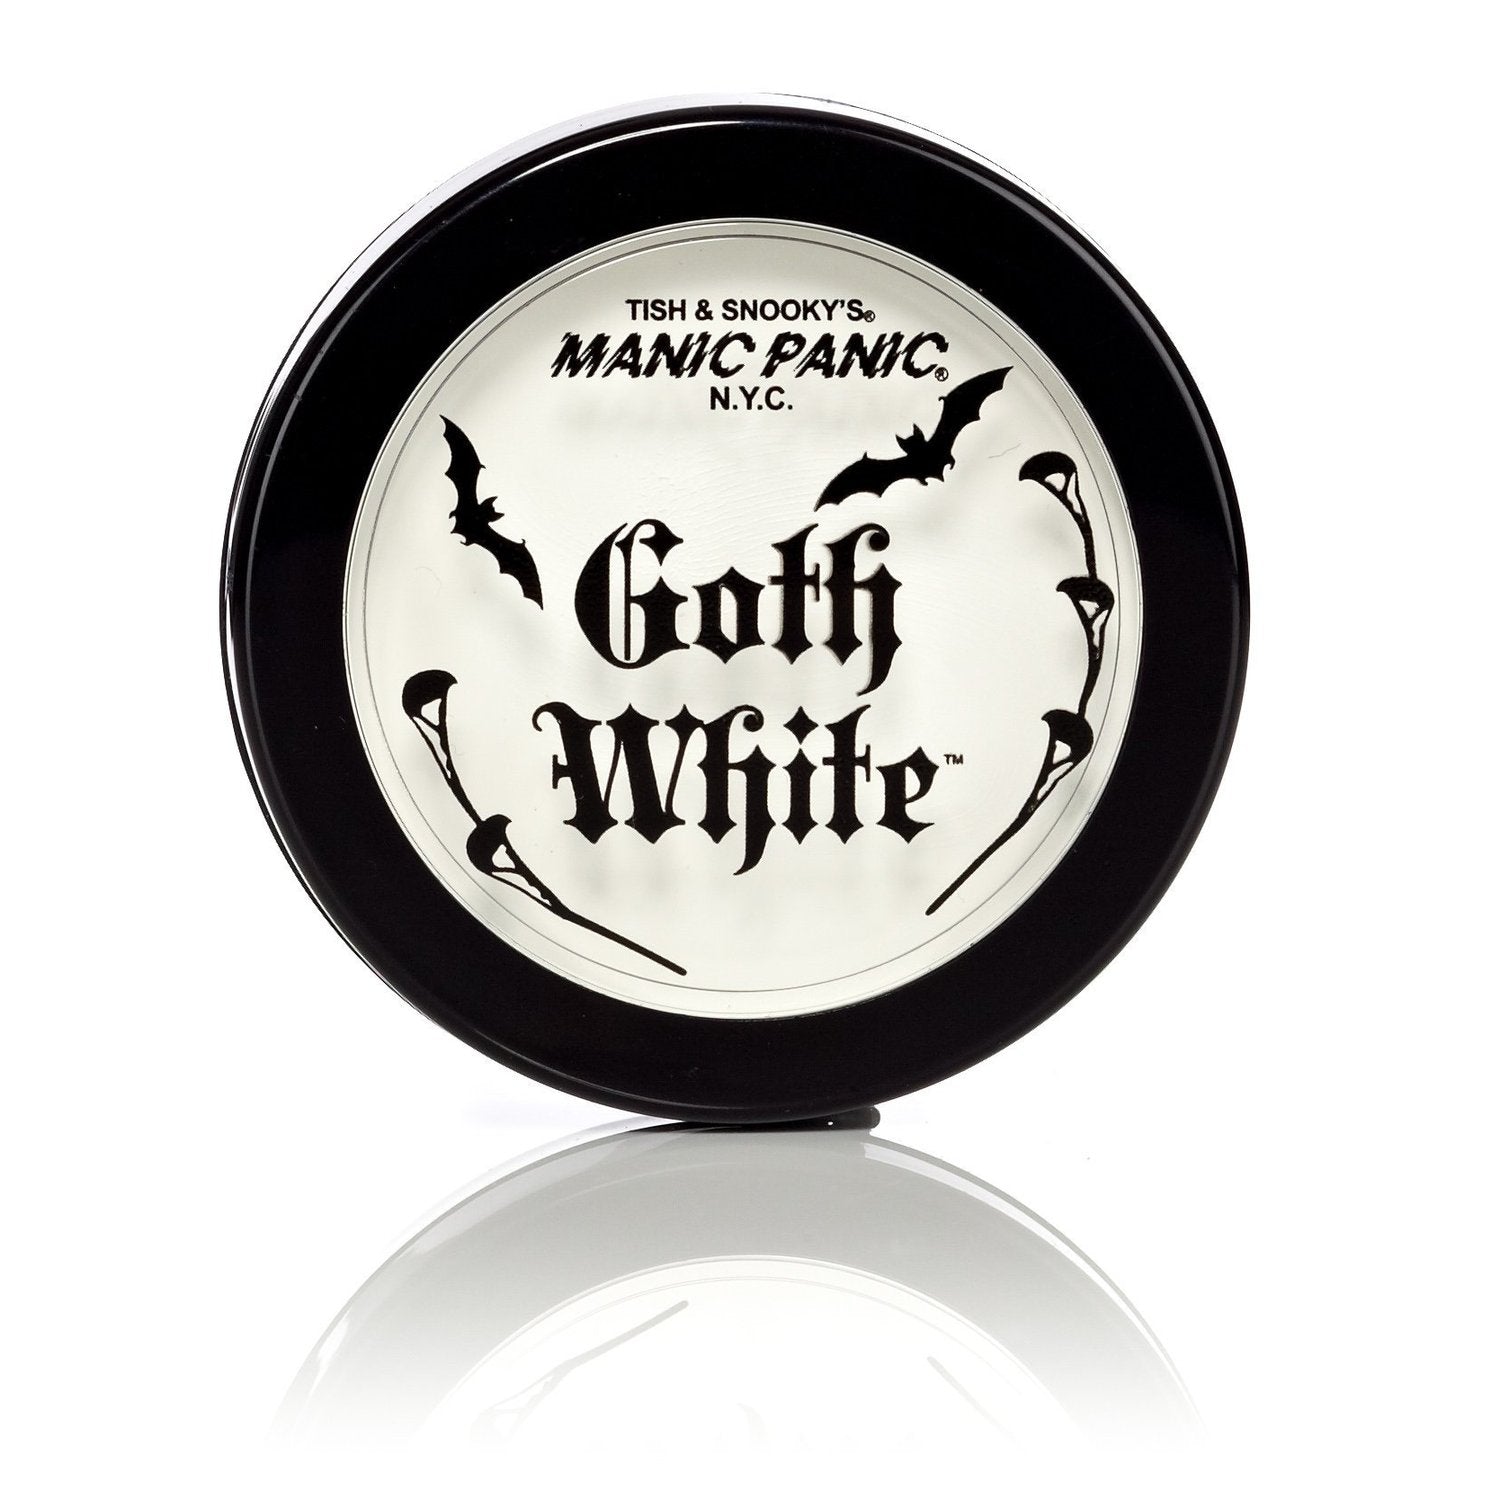 Goth White Cream/Powder Foundation by Manic PanicAnother Way of Life